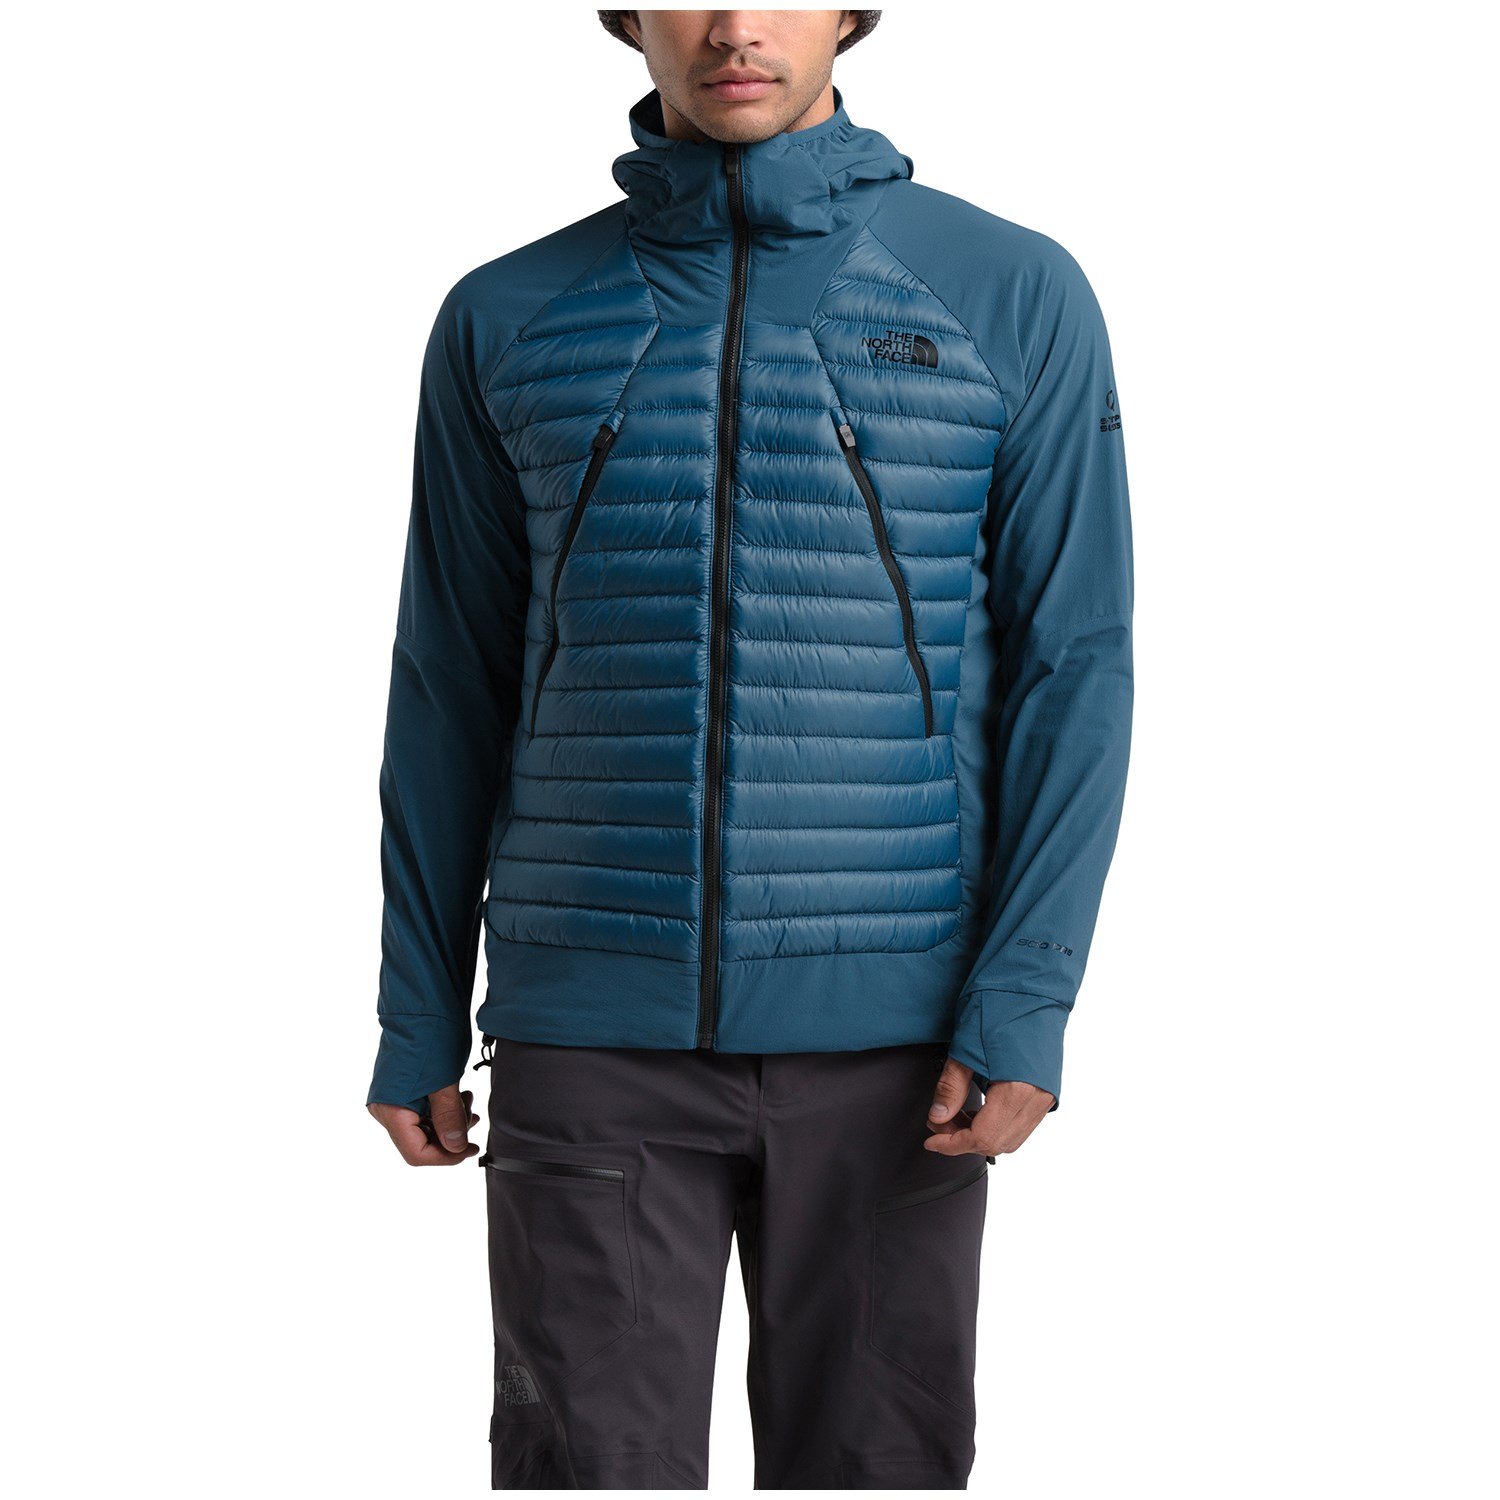 The North Face Unlimited Jacket - Men's | evo